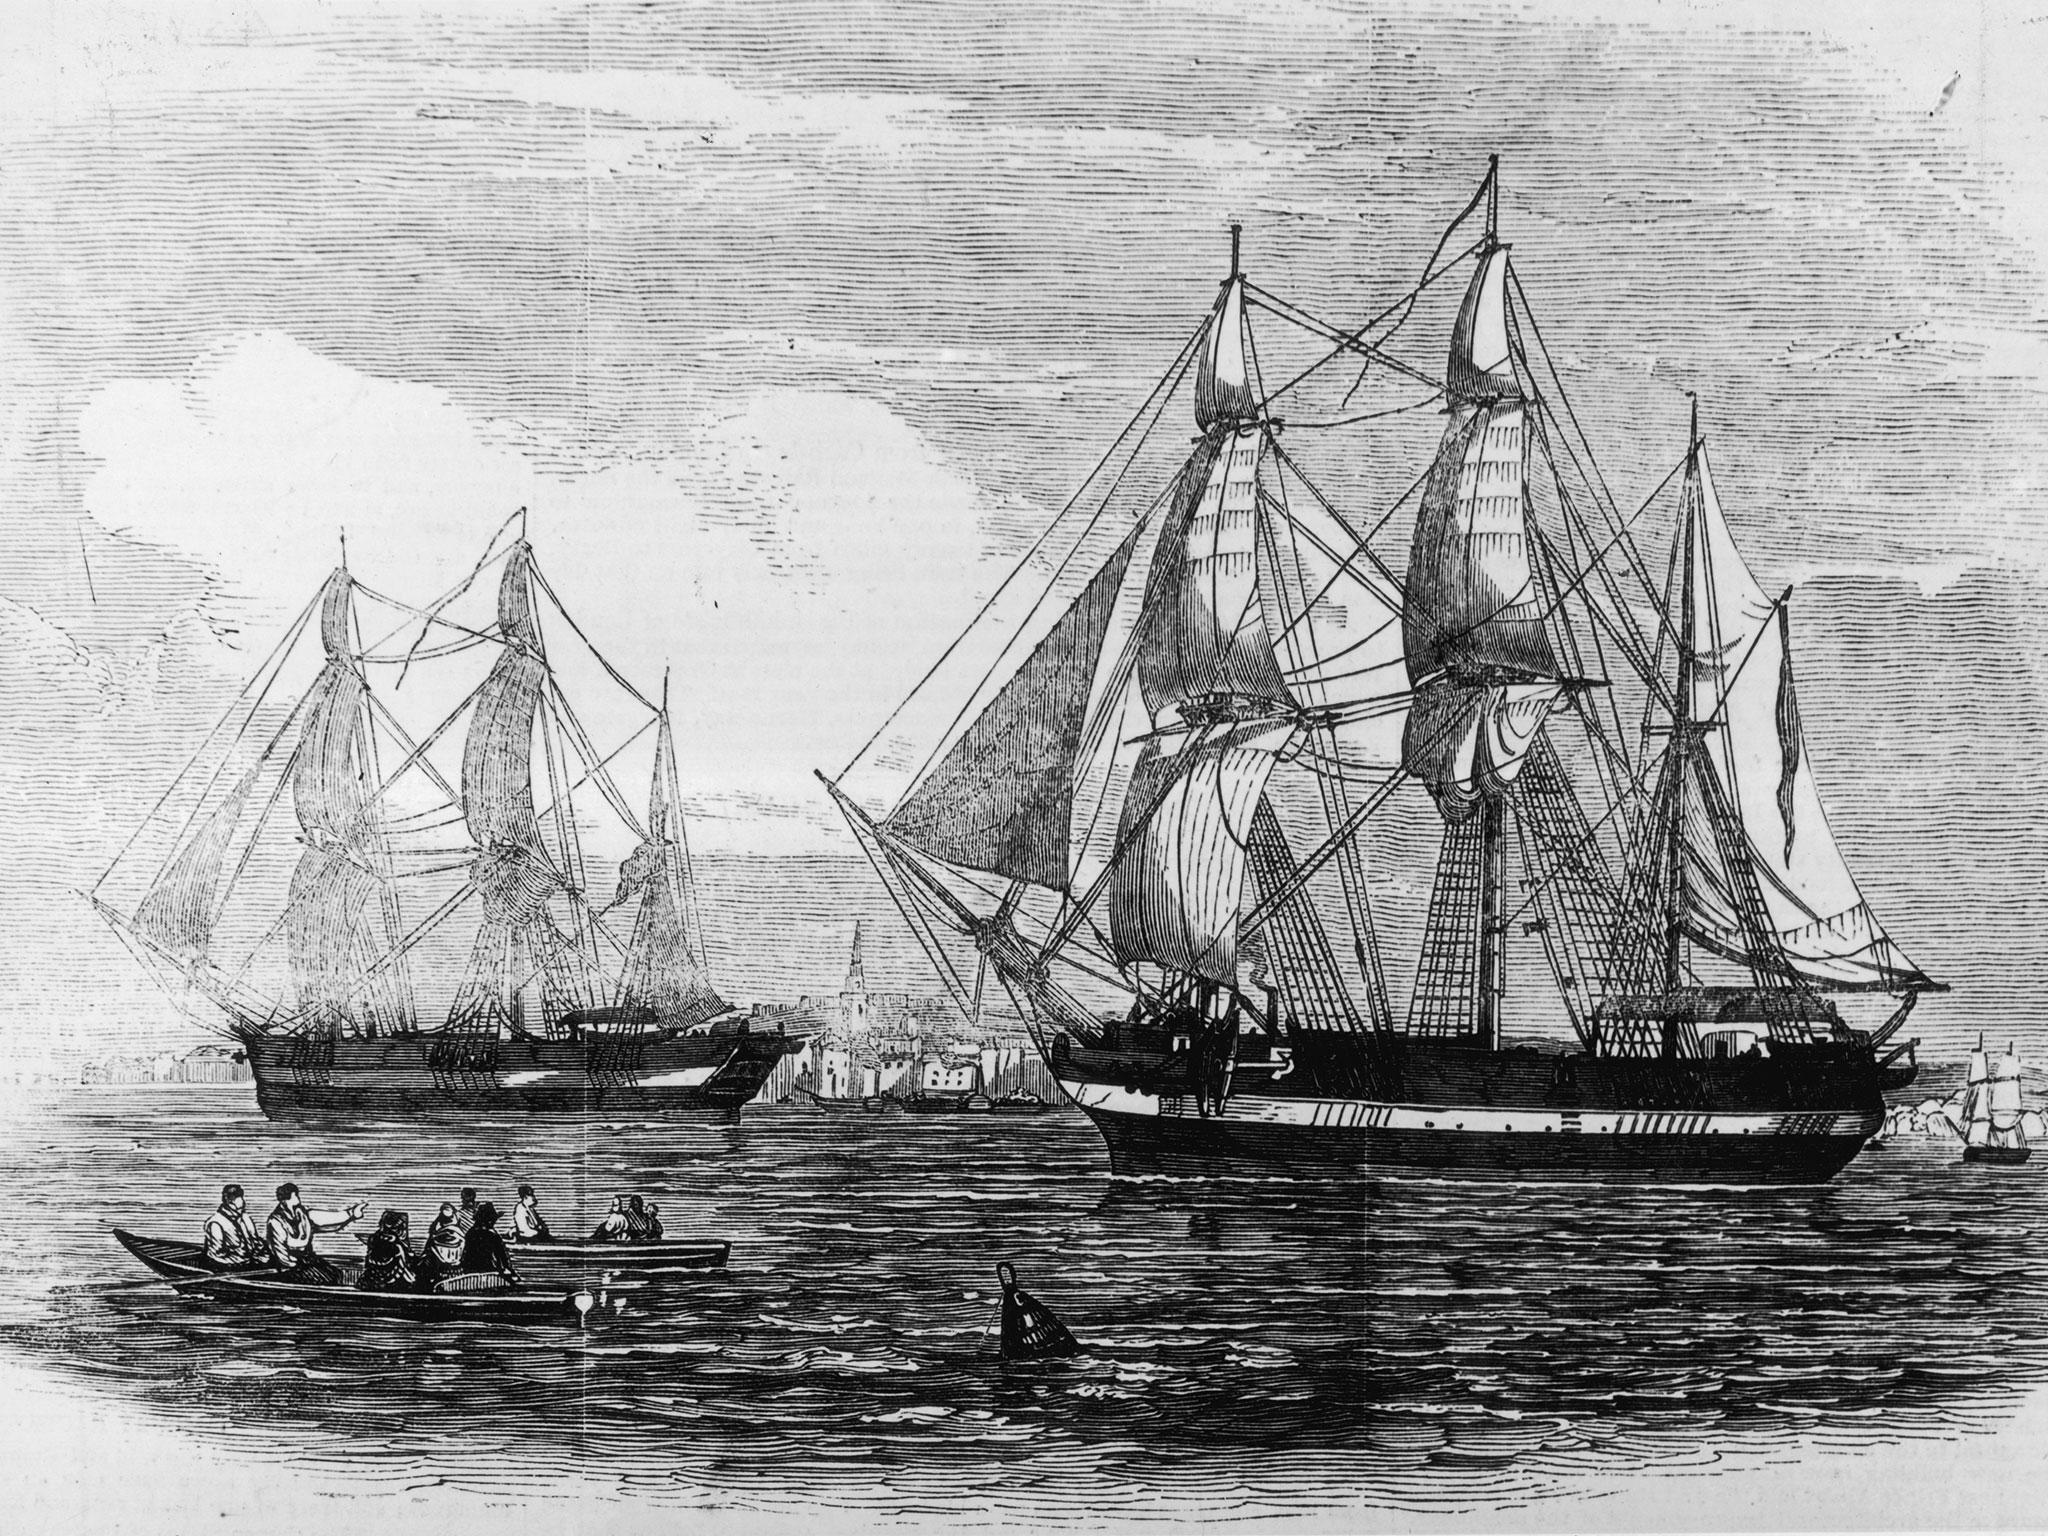 HMS ‘Erebus’ and HMS ‘Terror’ were used in Sir John Franklin’s ill-fated attempt to discover the North-west Passage in 1845